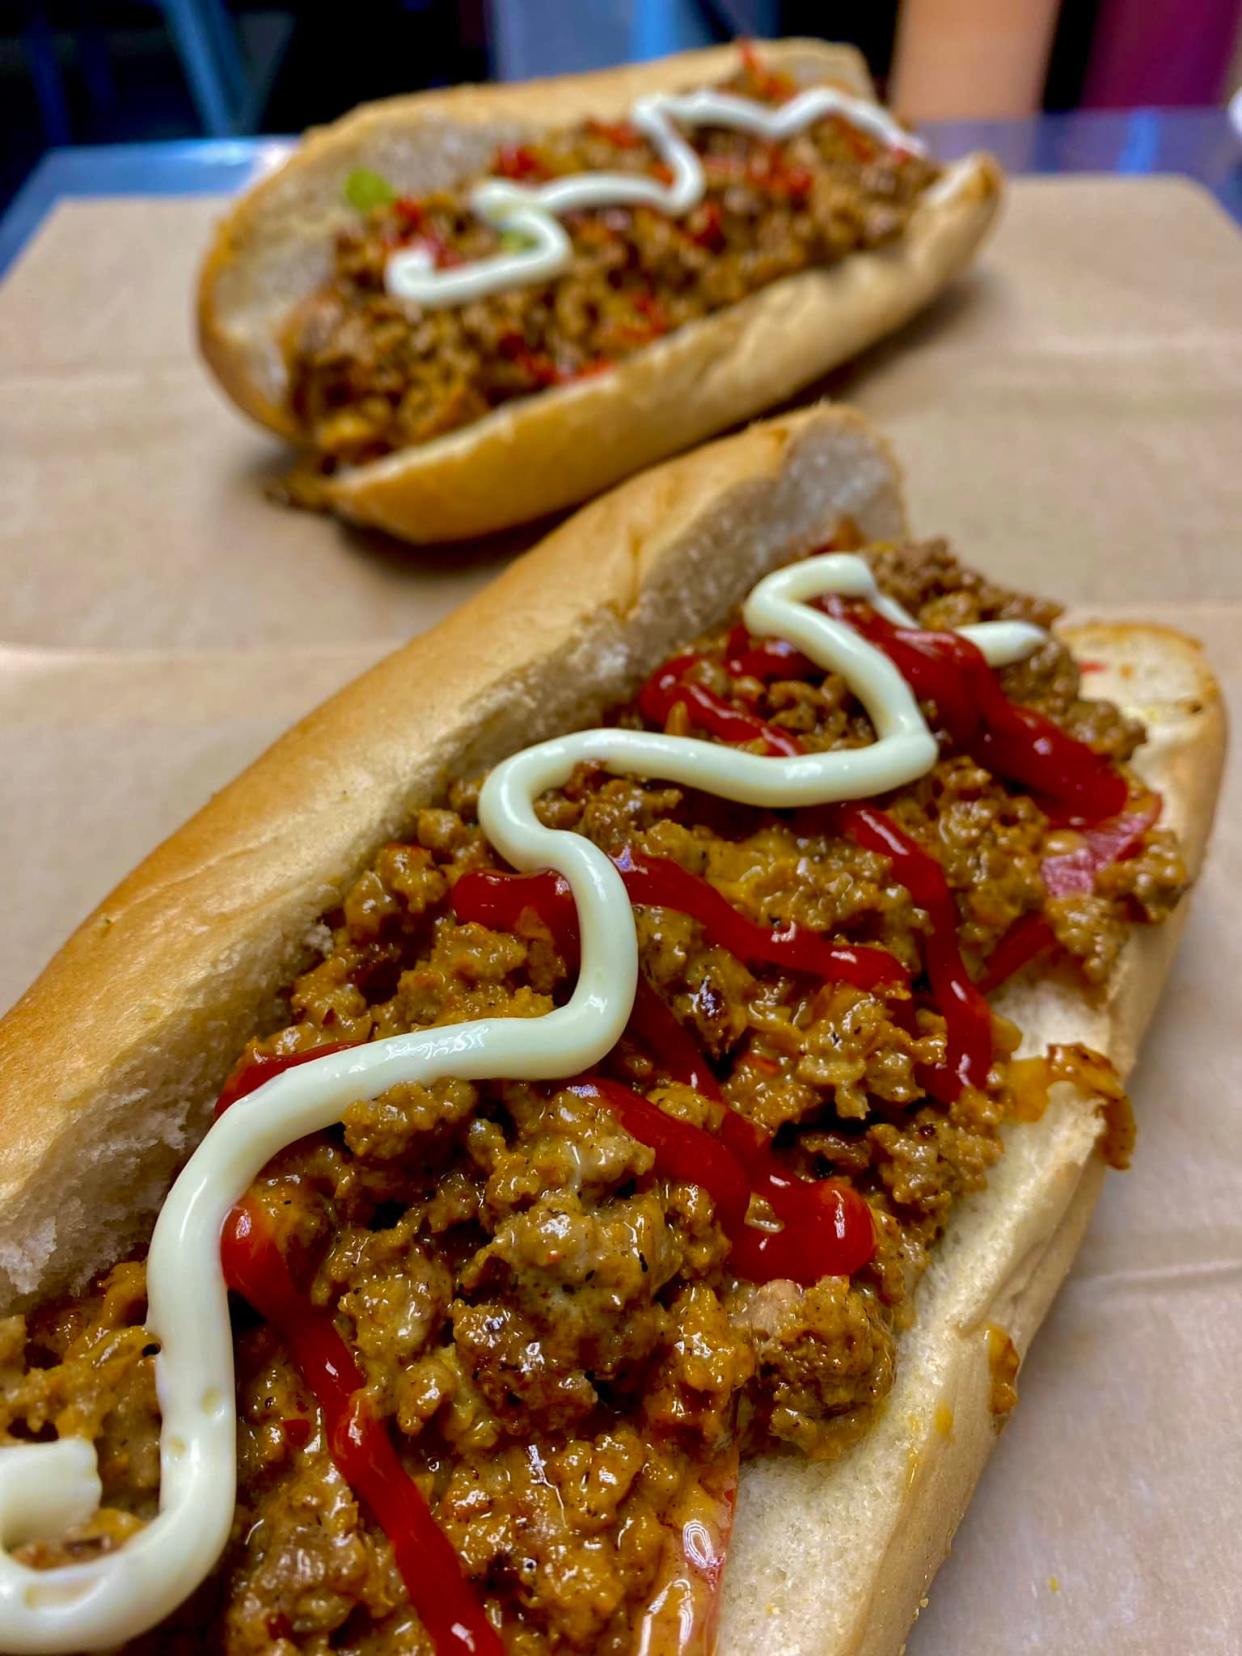 The chopped cheese sandwich at The Bearded Chicken in Somerset includes beef flavored with Azorean spices, caramelized onions and cheese on a sub roll.